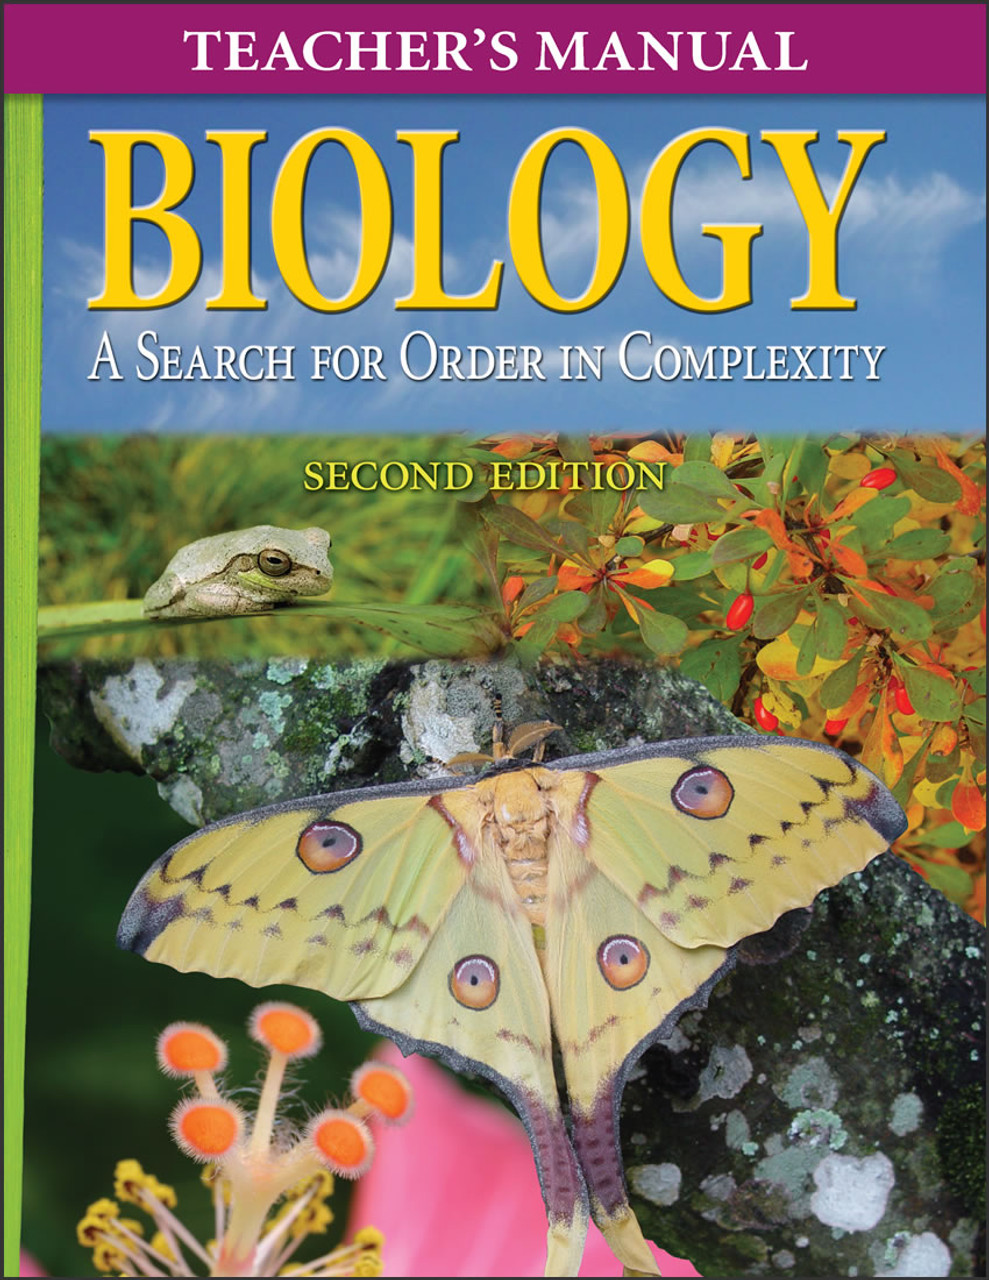 Order　Christian　Teacher's　2nd　Manual　edition　Liberty　in　A　for　Search　Biology:　Complexity,